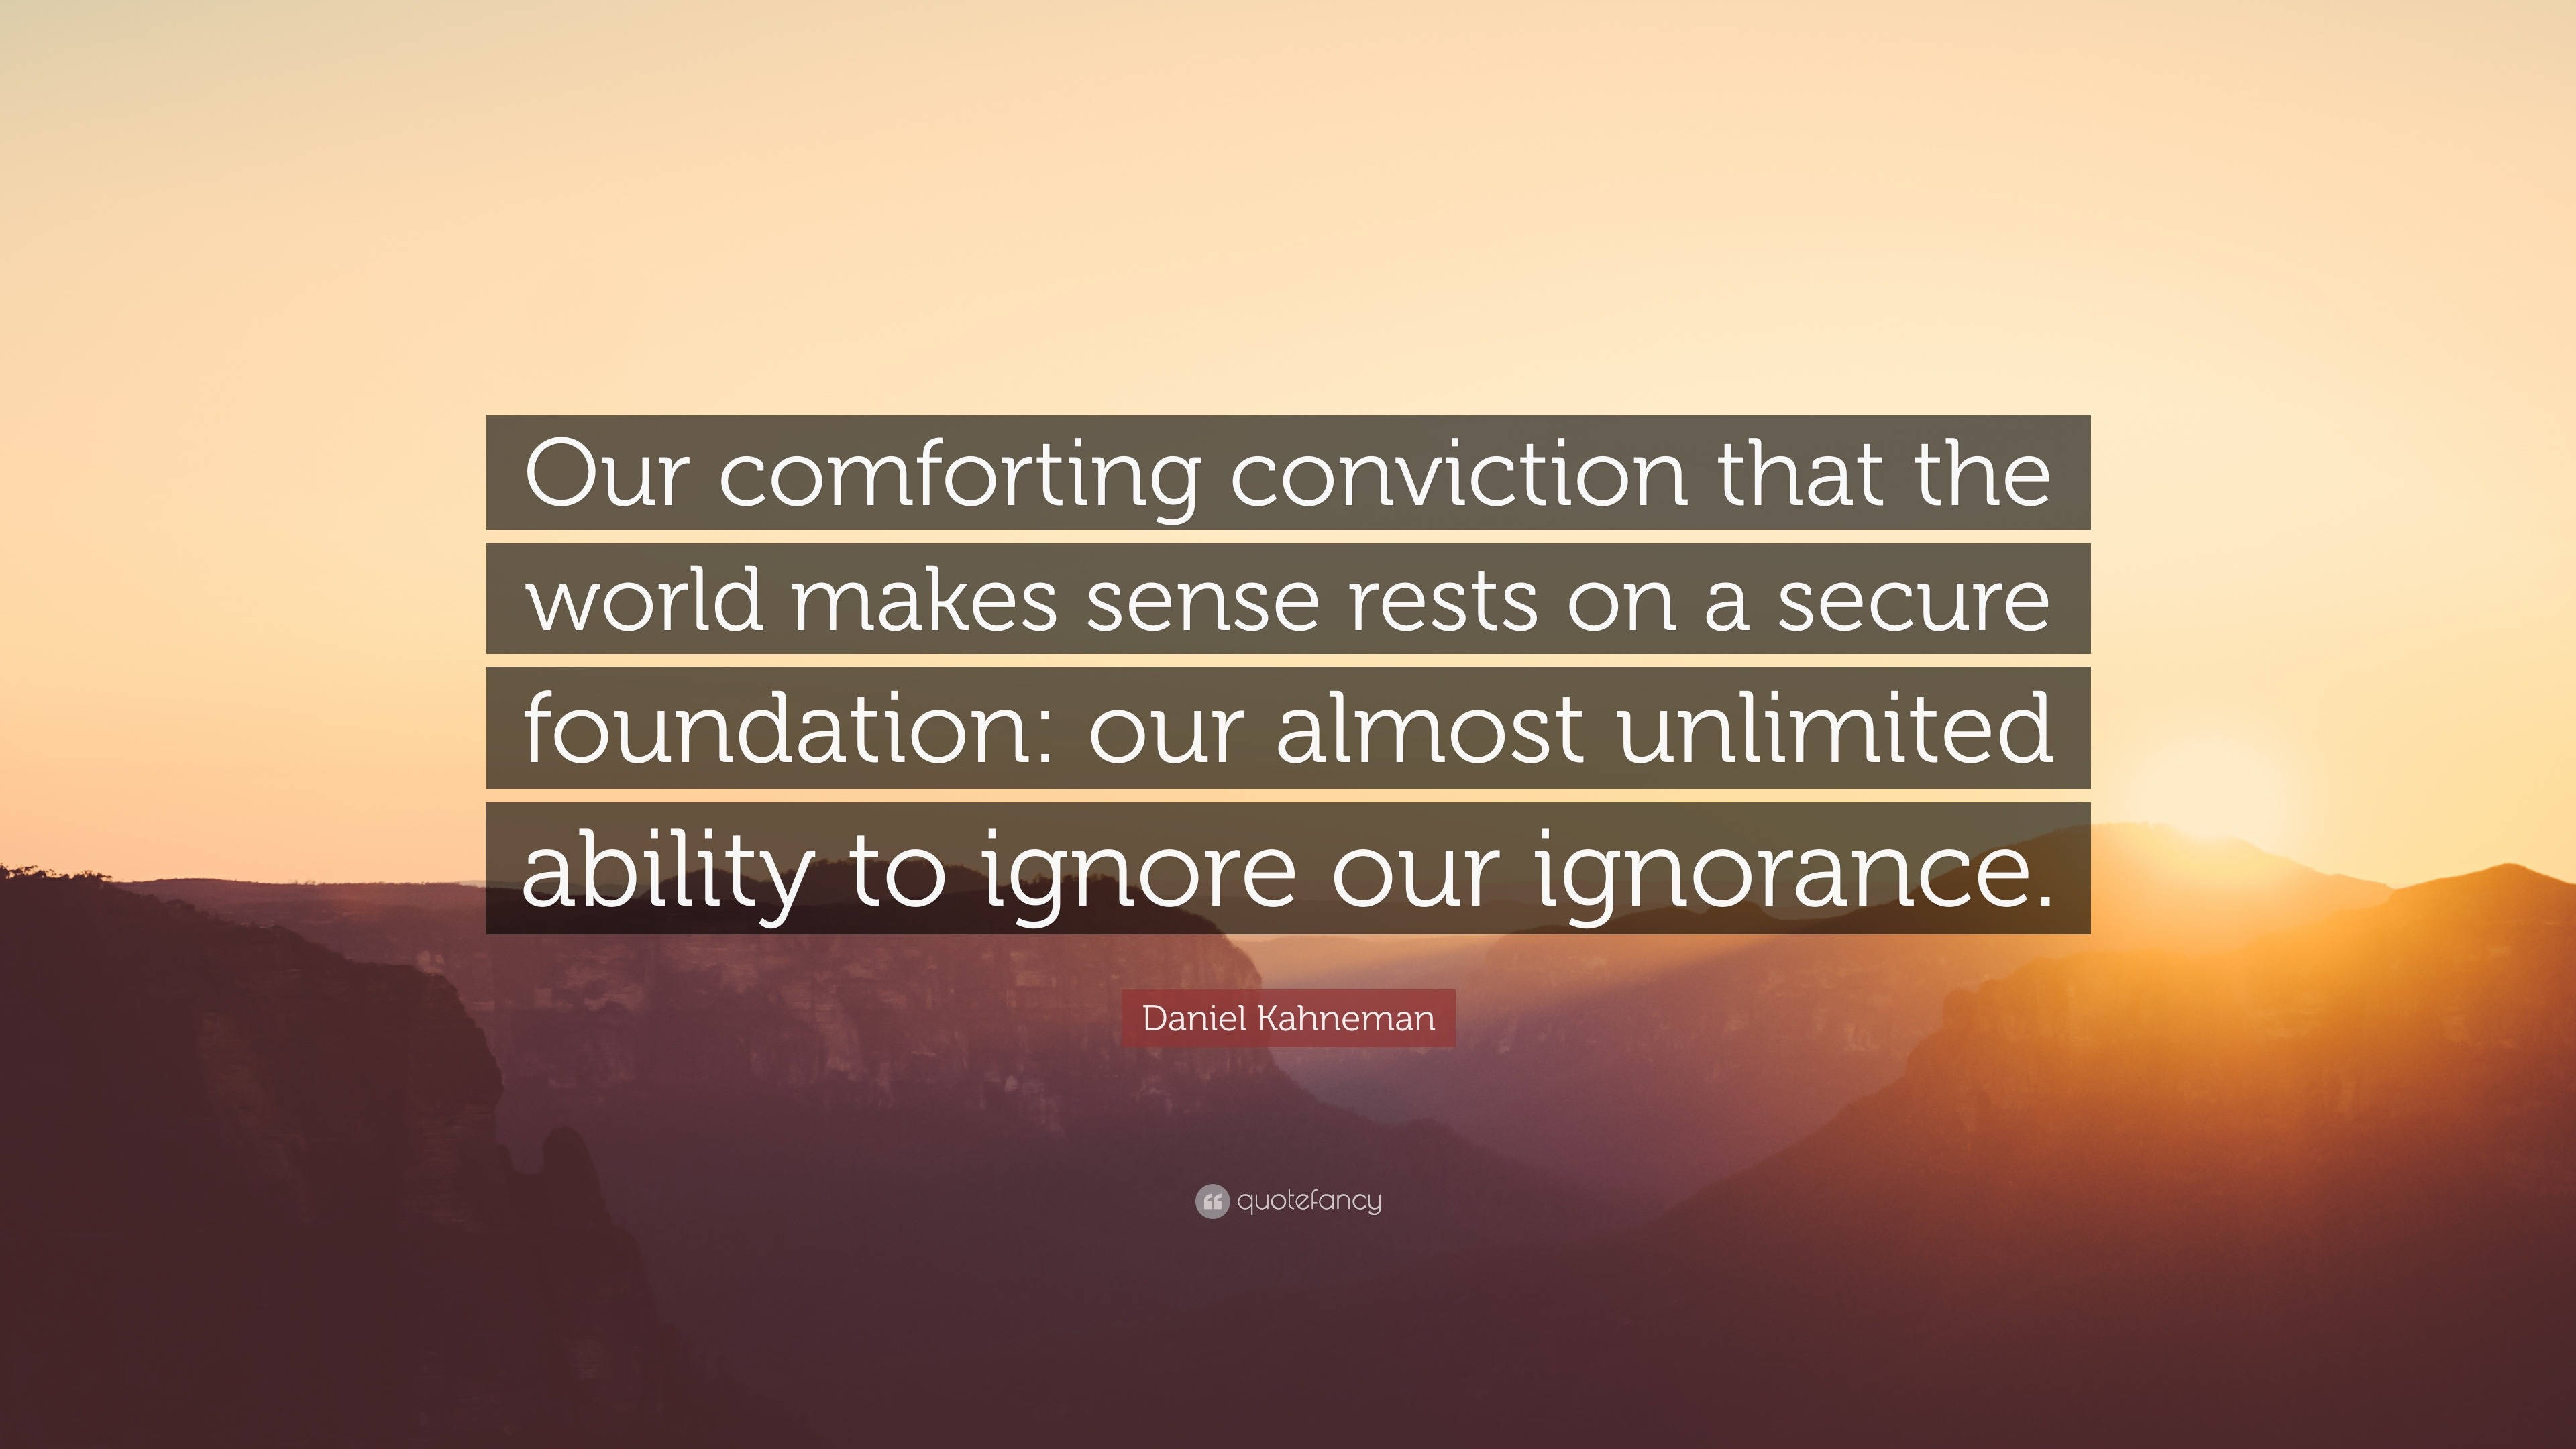 Daniel Kahneman Quote: “Our comforting conviction that the world makes